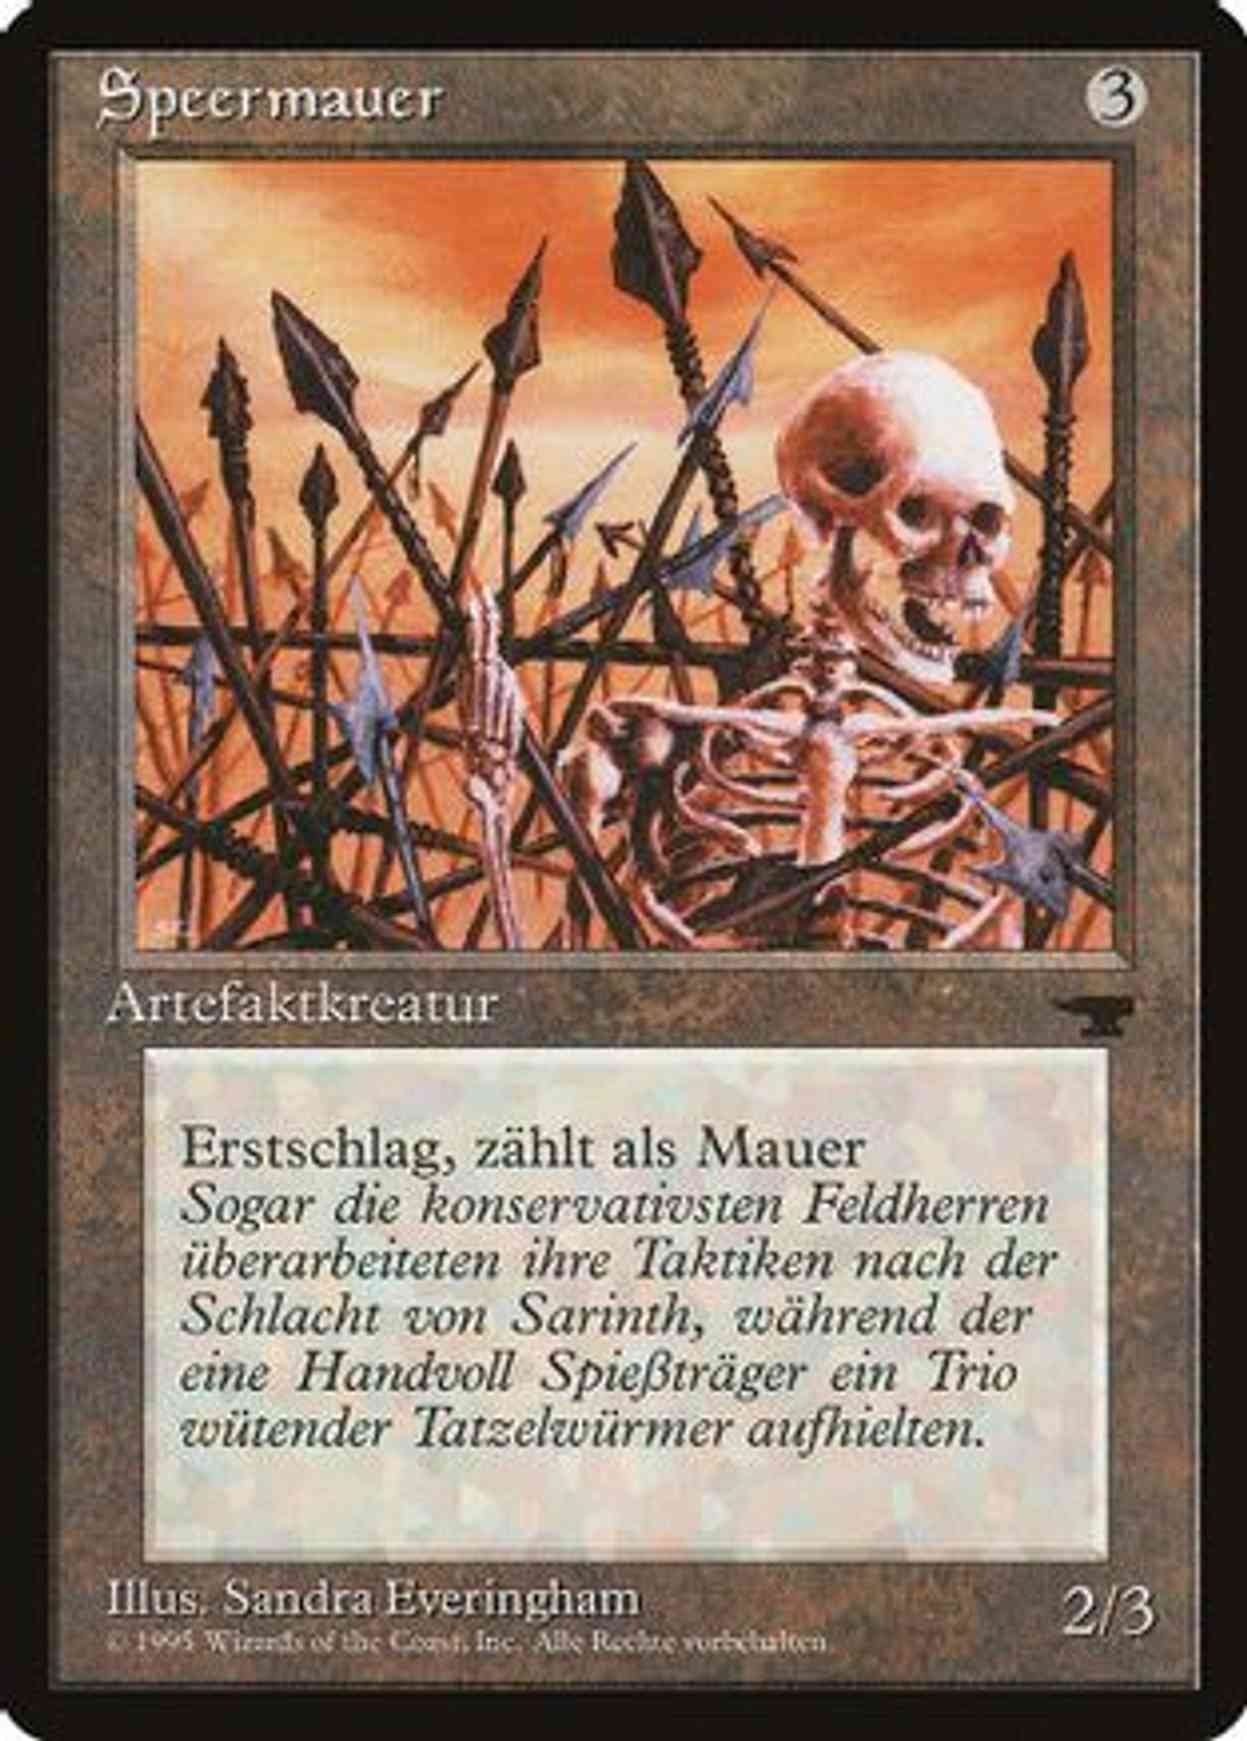 Wall of Spears (German) - "Speermauer" magic card front